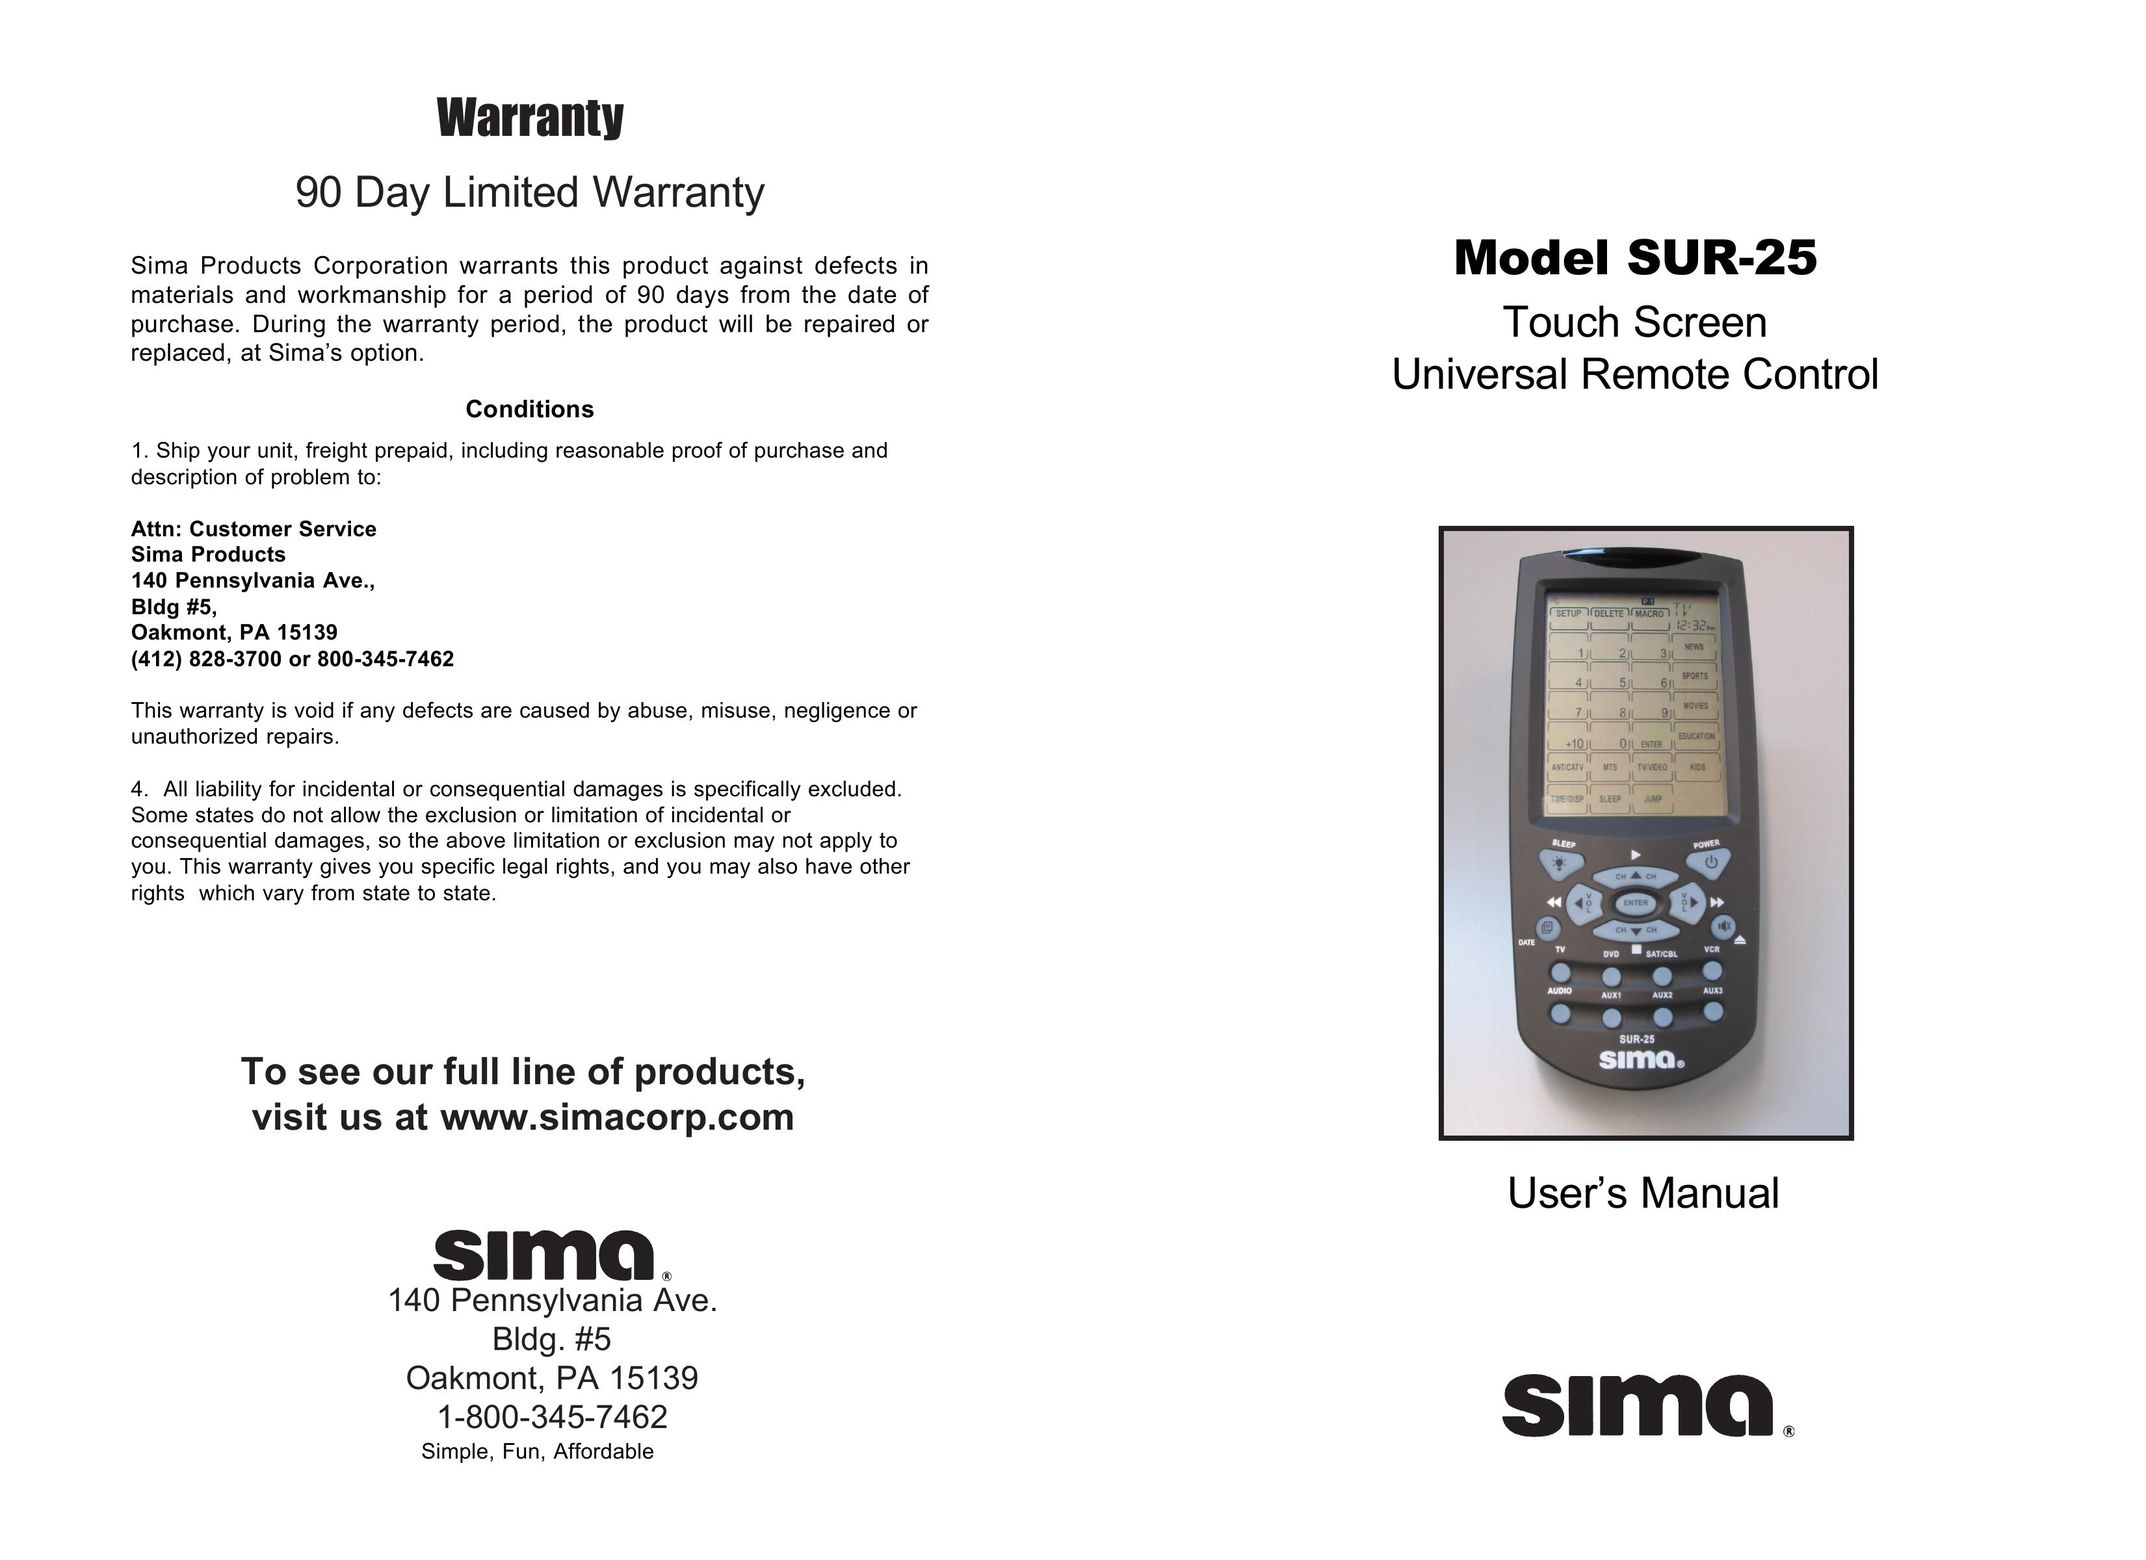 Sima Products SUR-25 Universal Remote User Manual